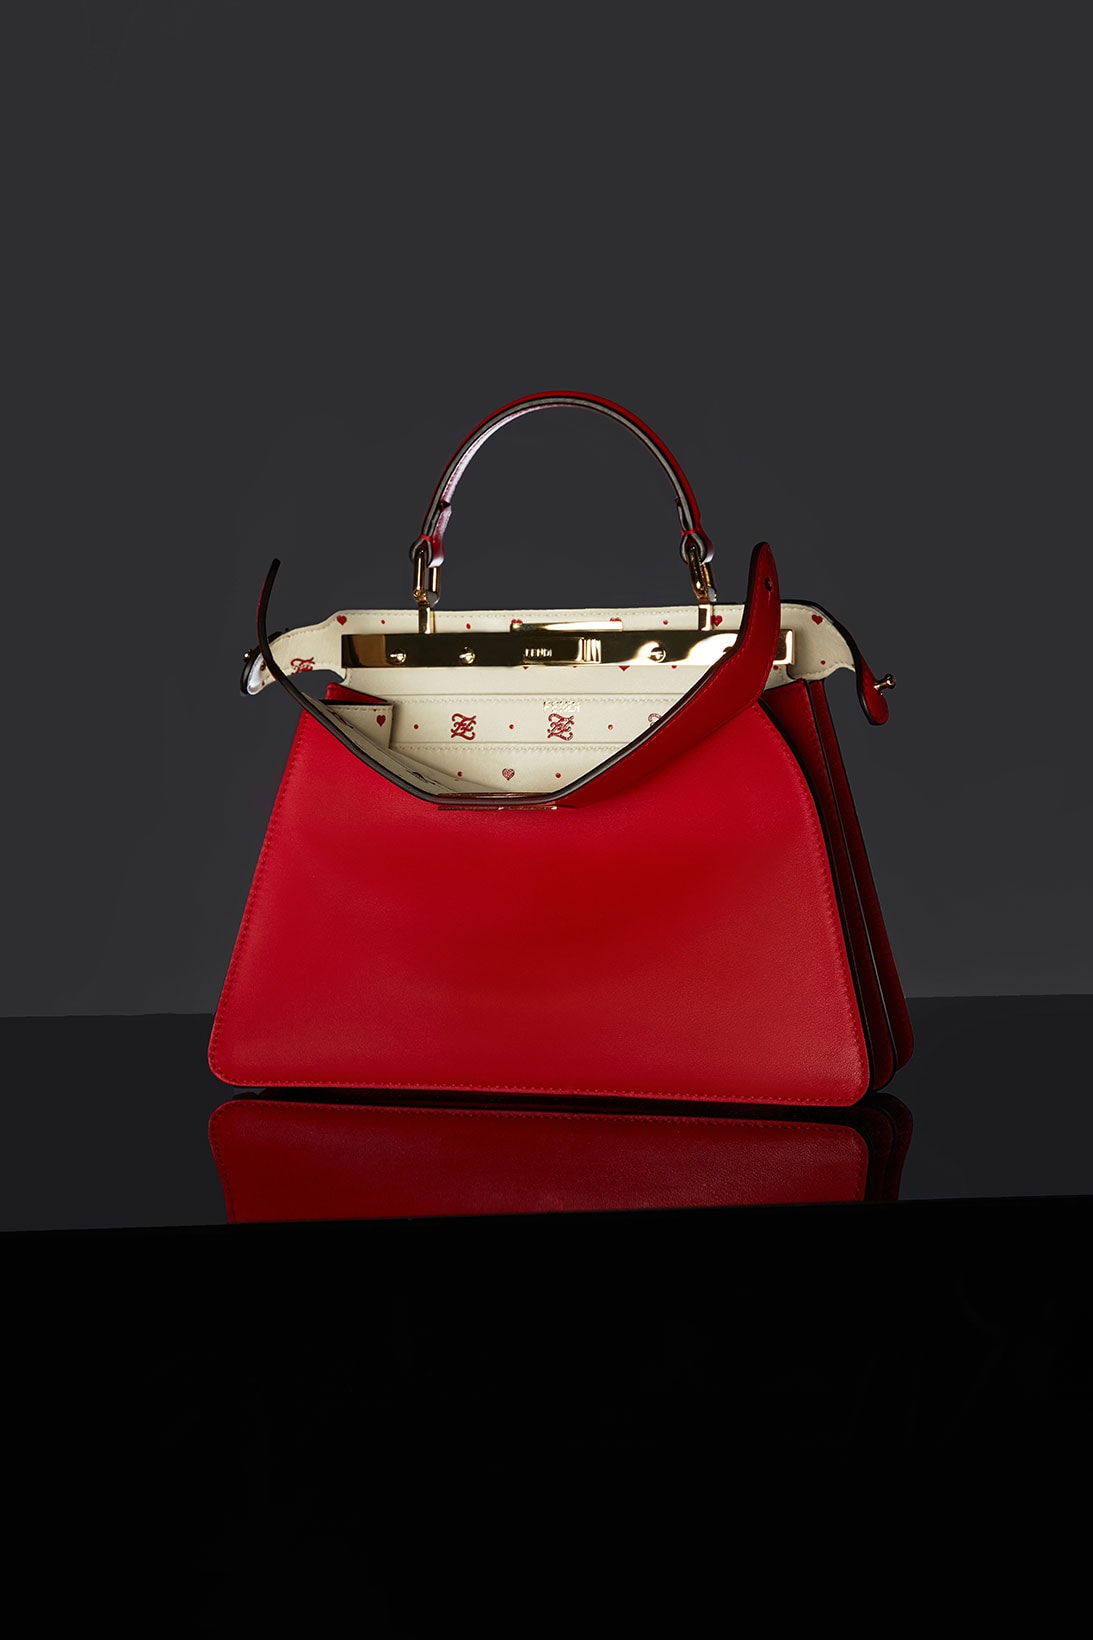 Exclusive, Handcrafted Fendi Baguette Bags Celebrated in New Book – WWD